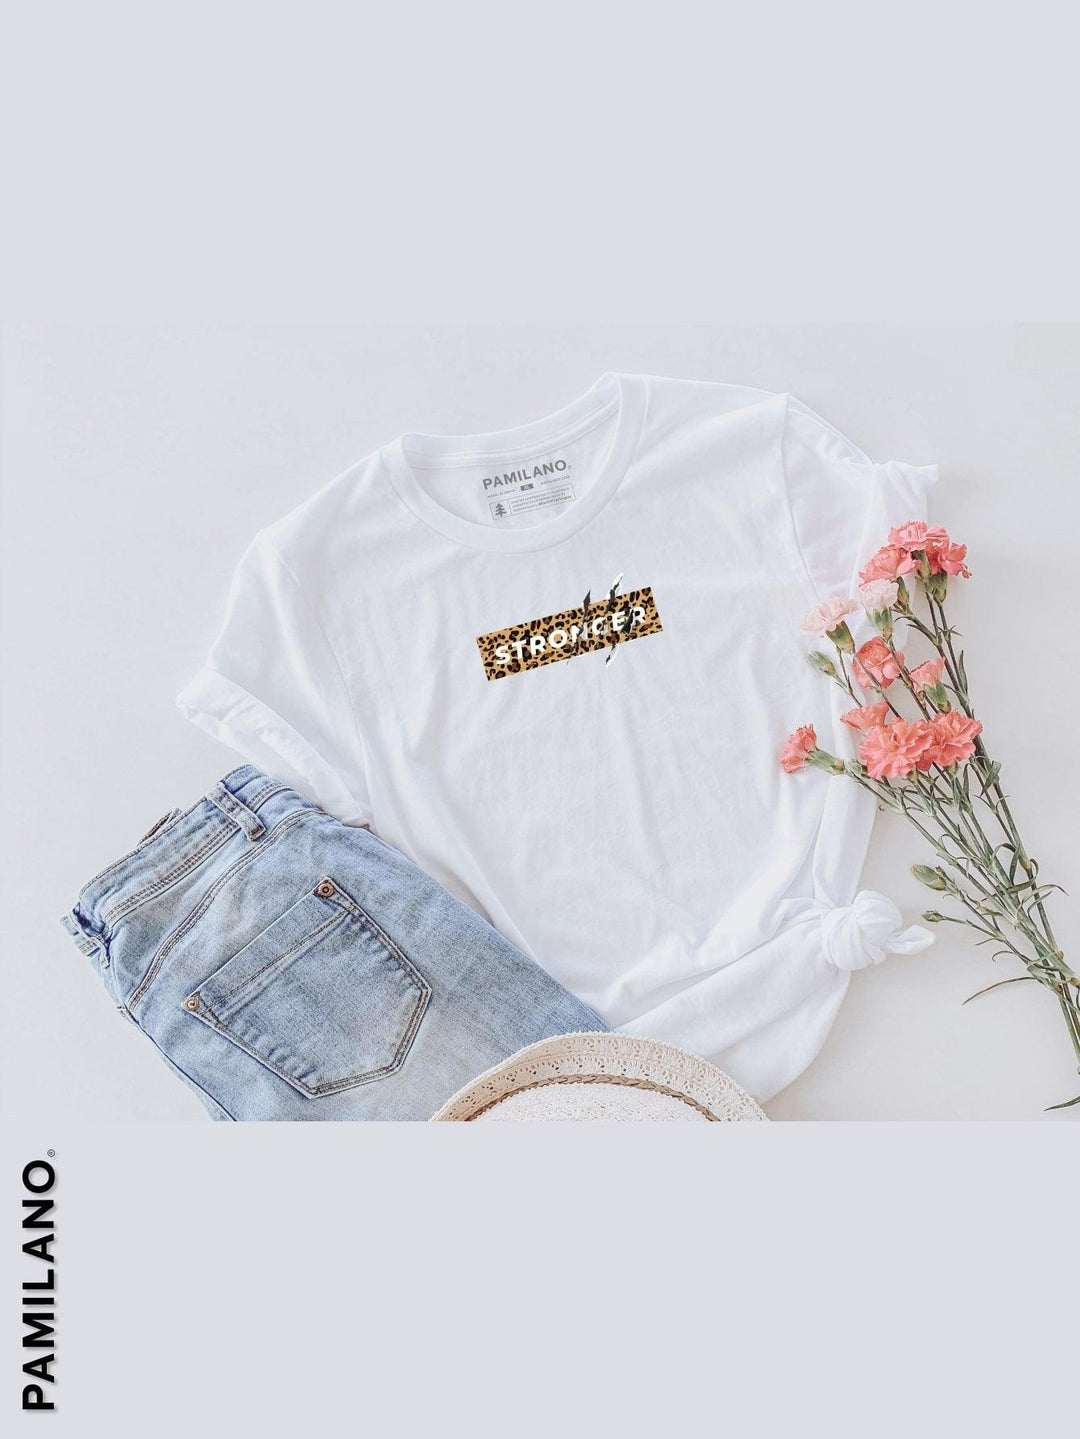 100% ring spun soft cotton women crew neck graphic tee or graphic t-shits